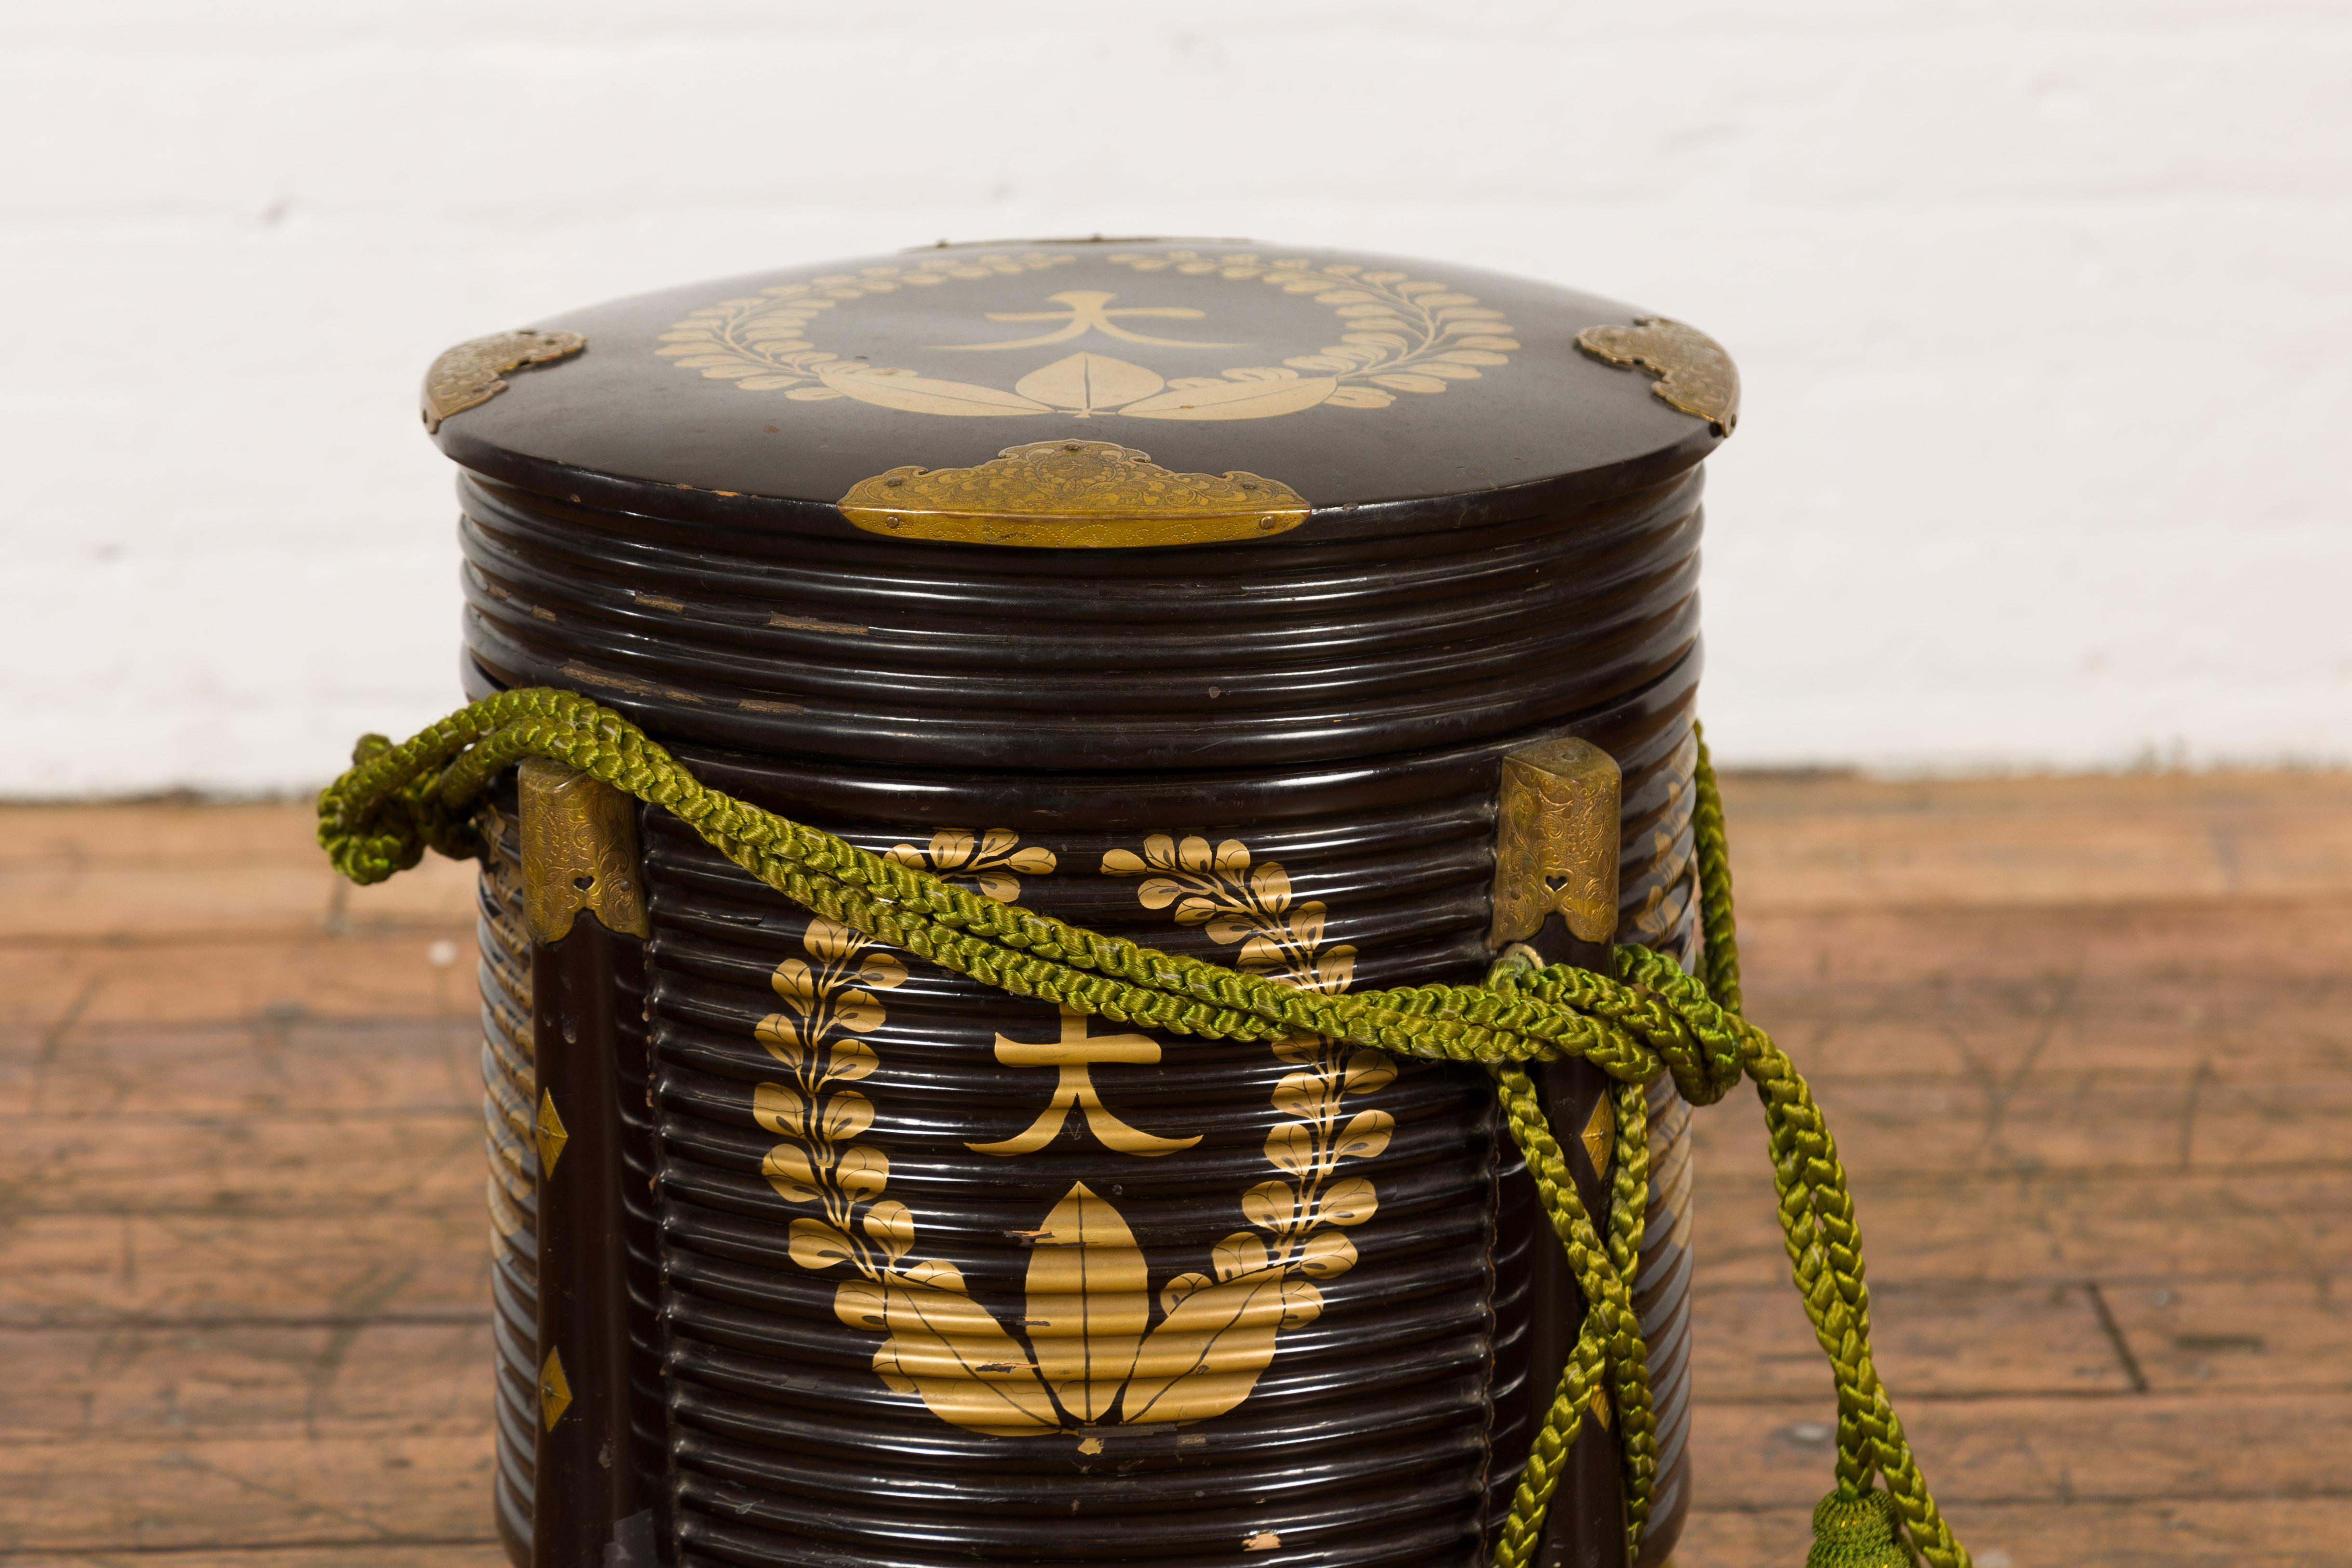 Japanese Meiji Period Hokai Lidded Box with Brass Accents and Original Rope In Good Condition For Sale In Yonkers, NY